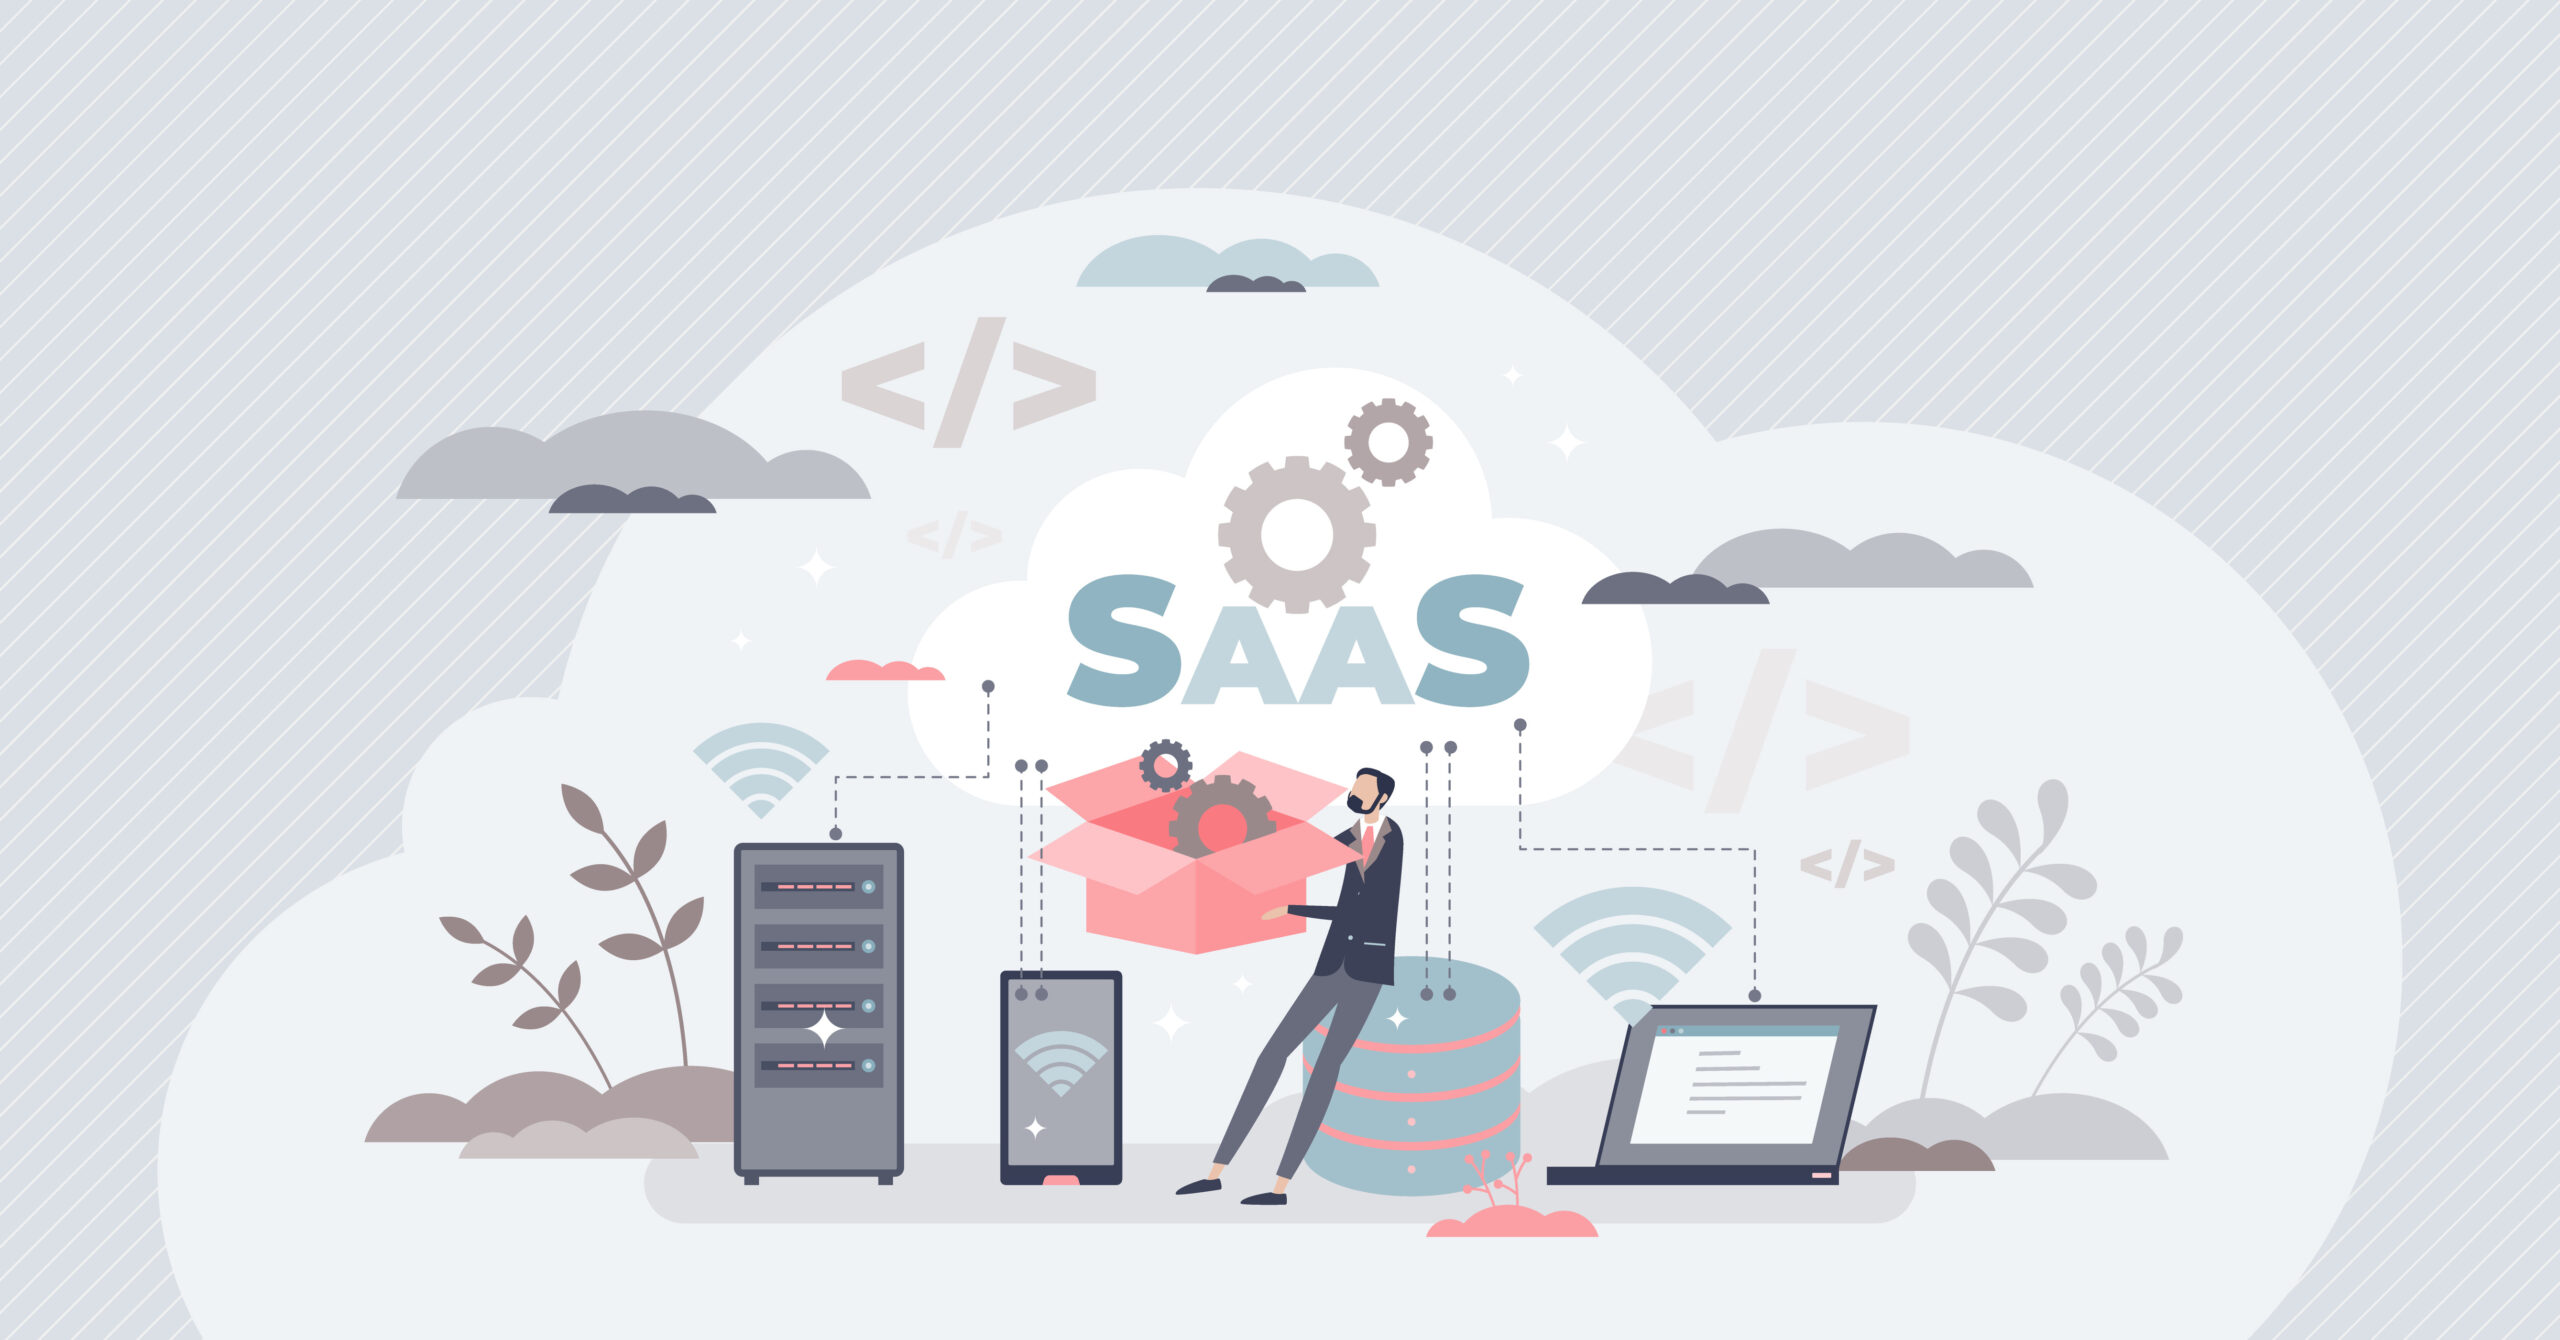 The SaaS market: exponential growth